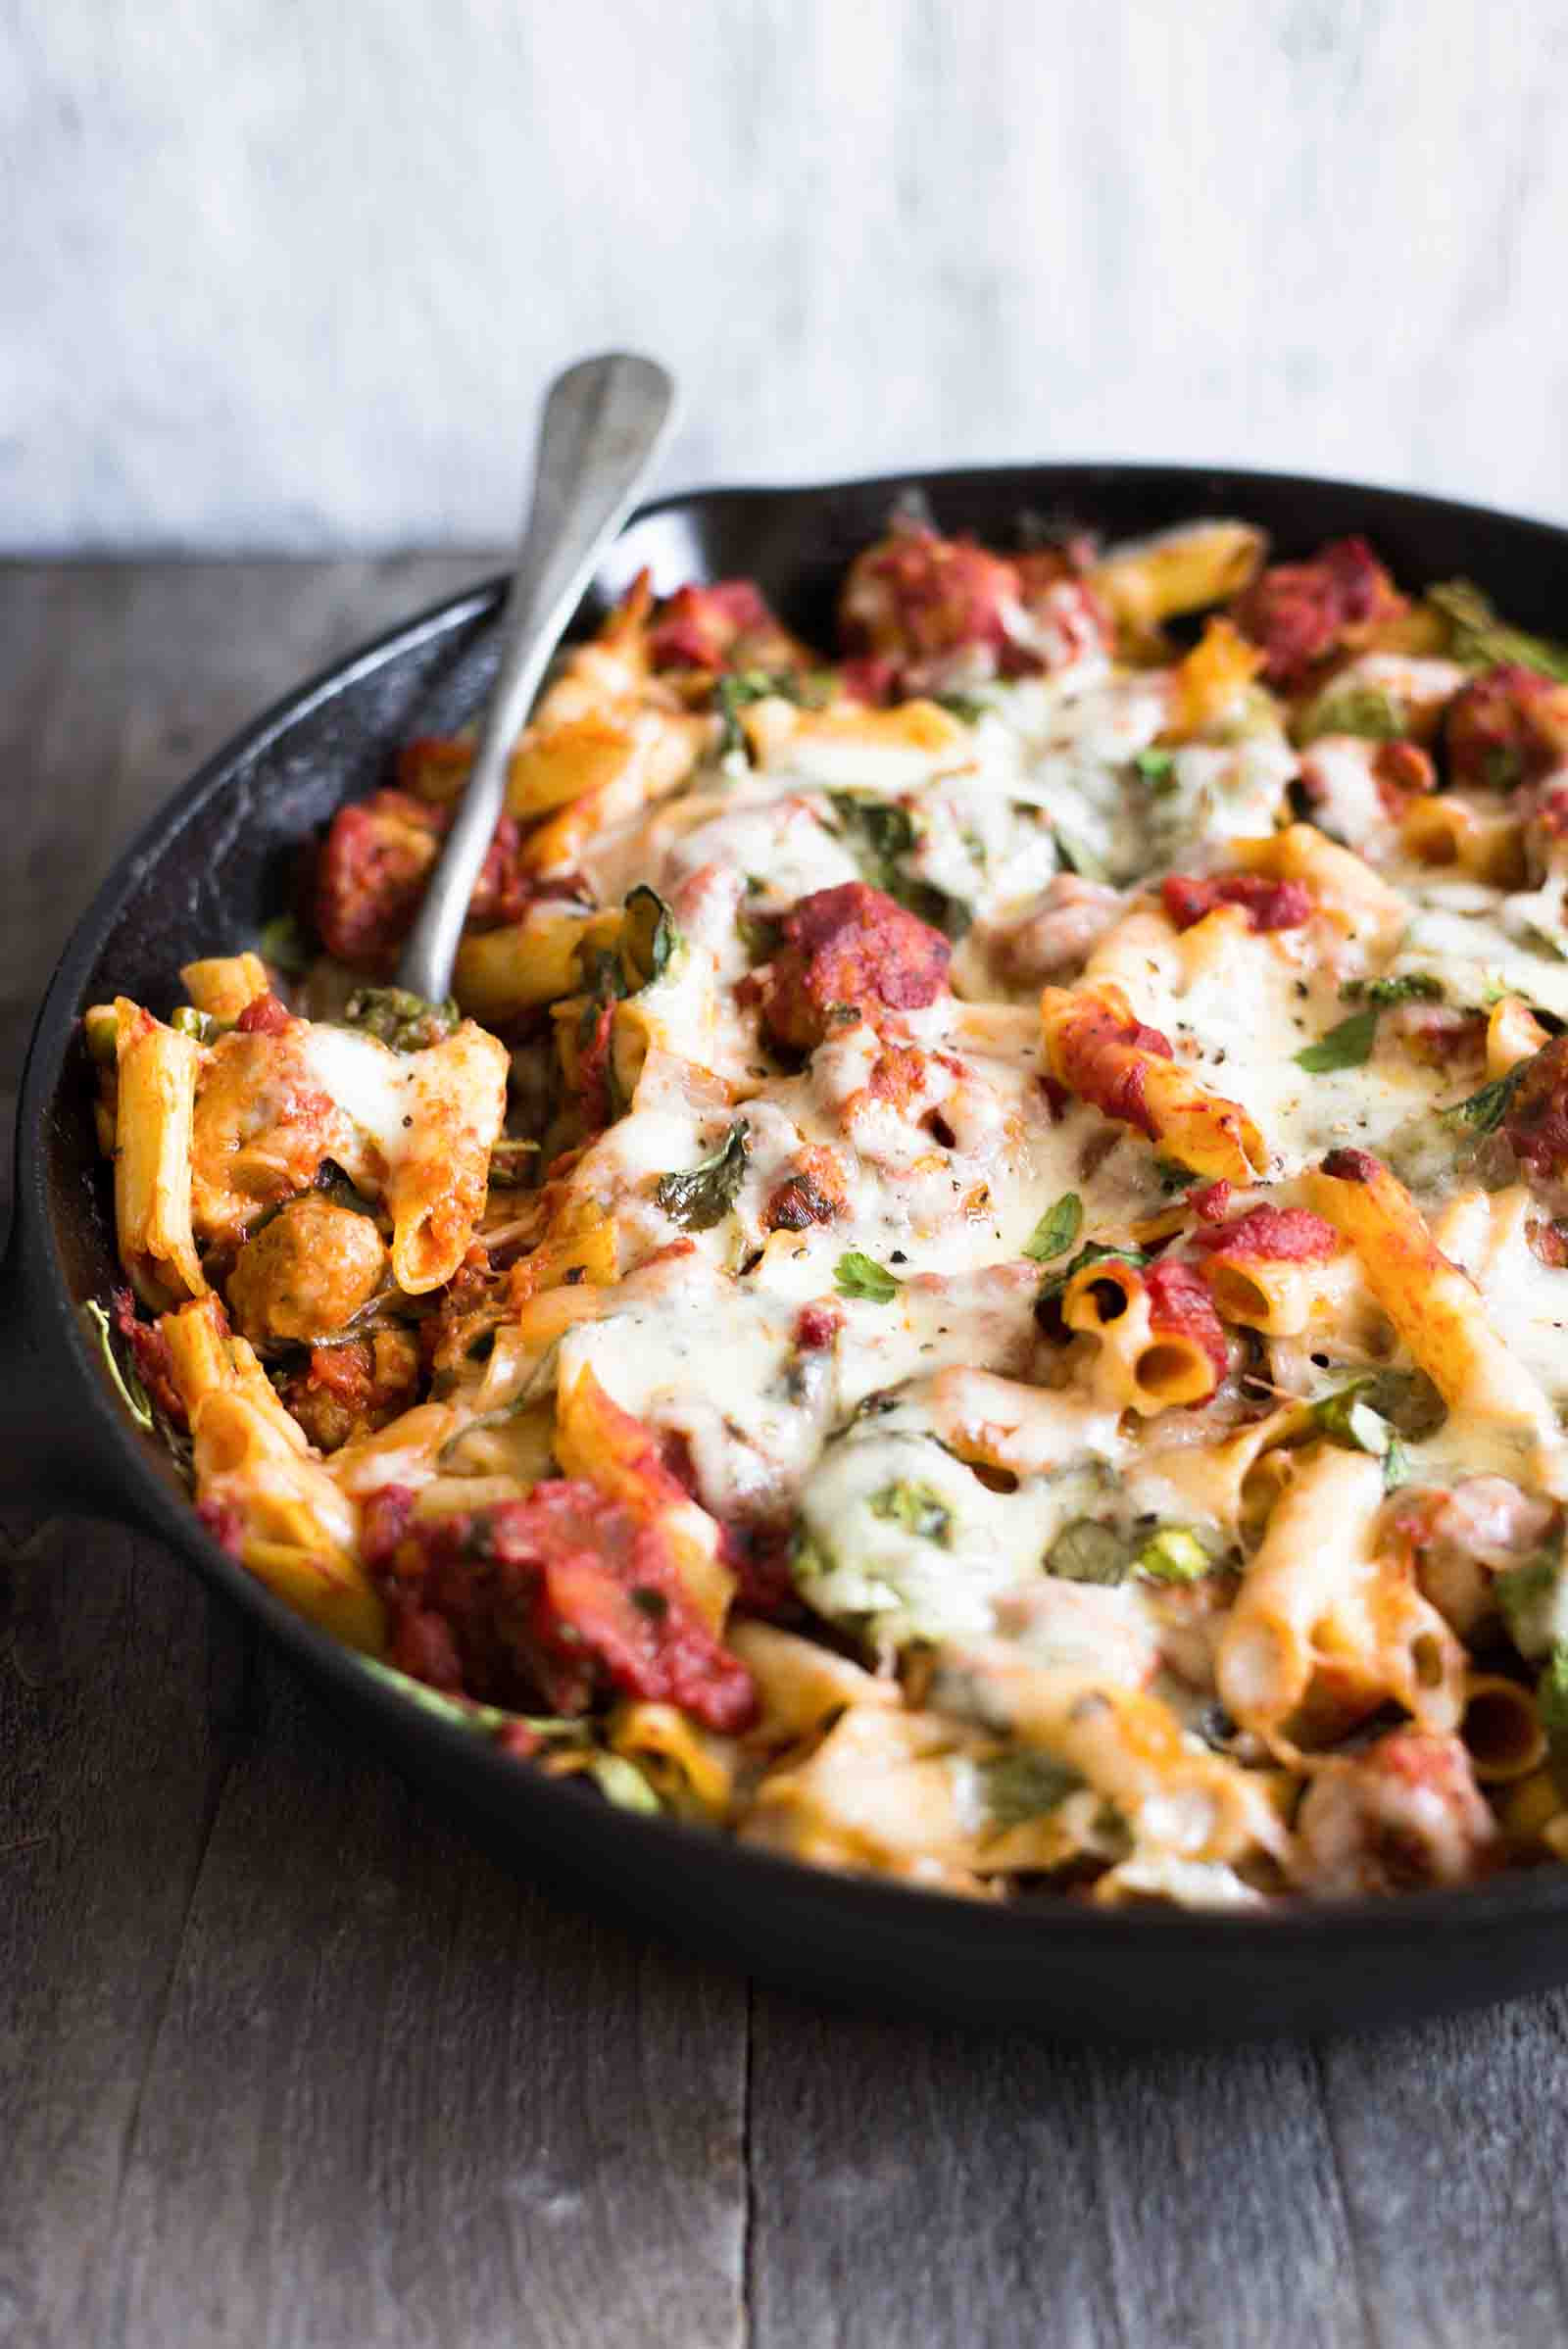 Chicken And Sausage Recipes Pasta
 Pasta Skillet with Chicken Sausage Cheese & Spinach